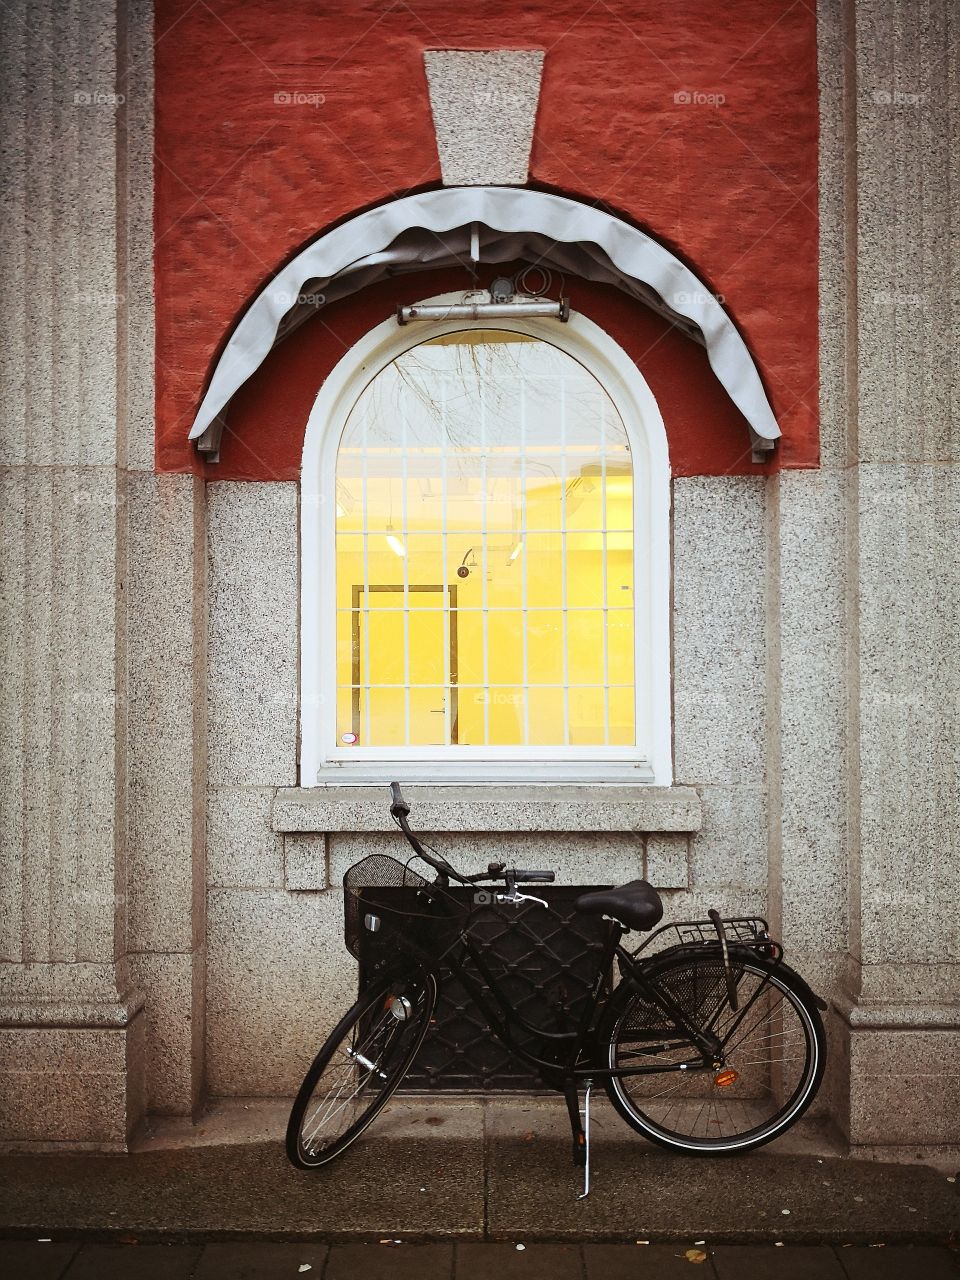 A bicycle under the window.